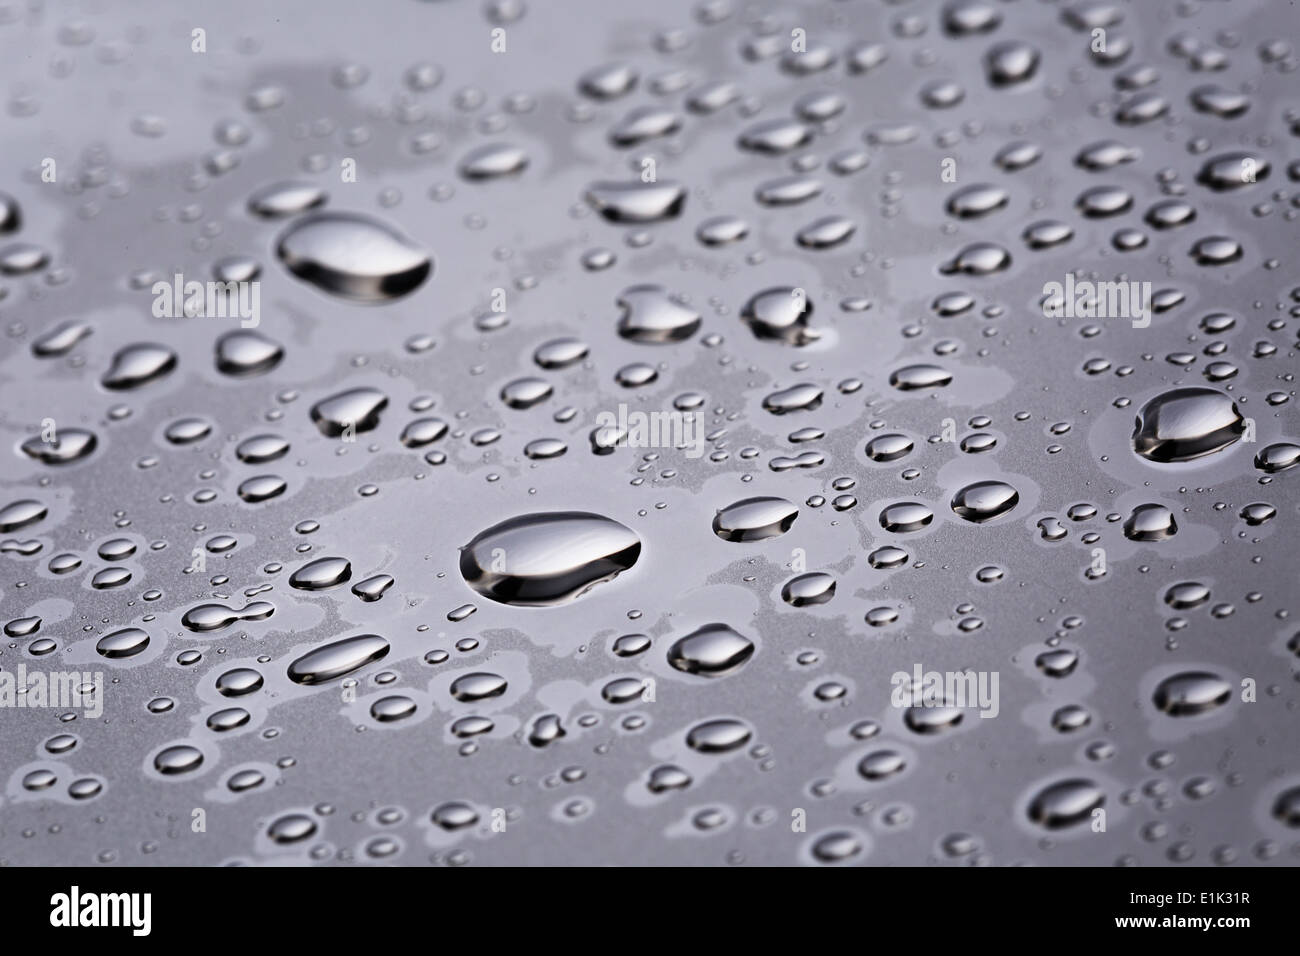 abstract water drops on polished stainless steel surface, close up Stock Photo